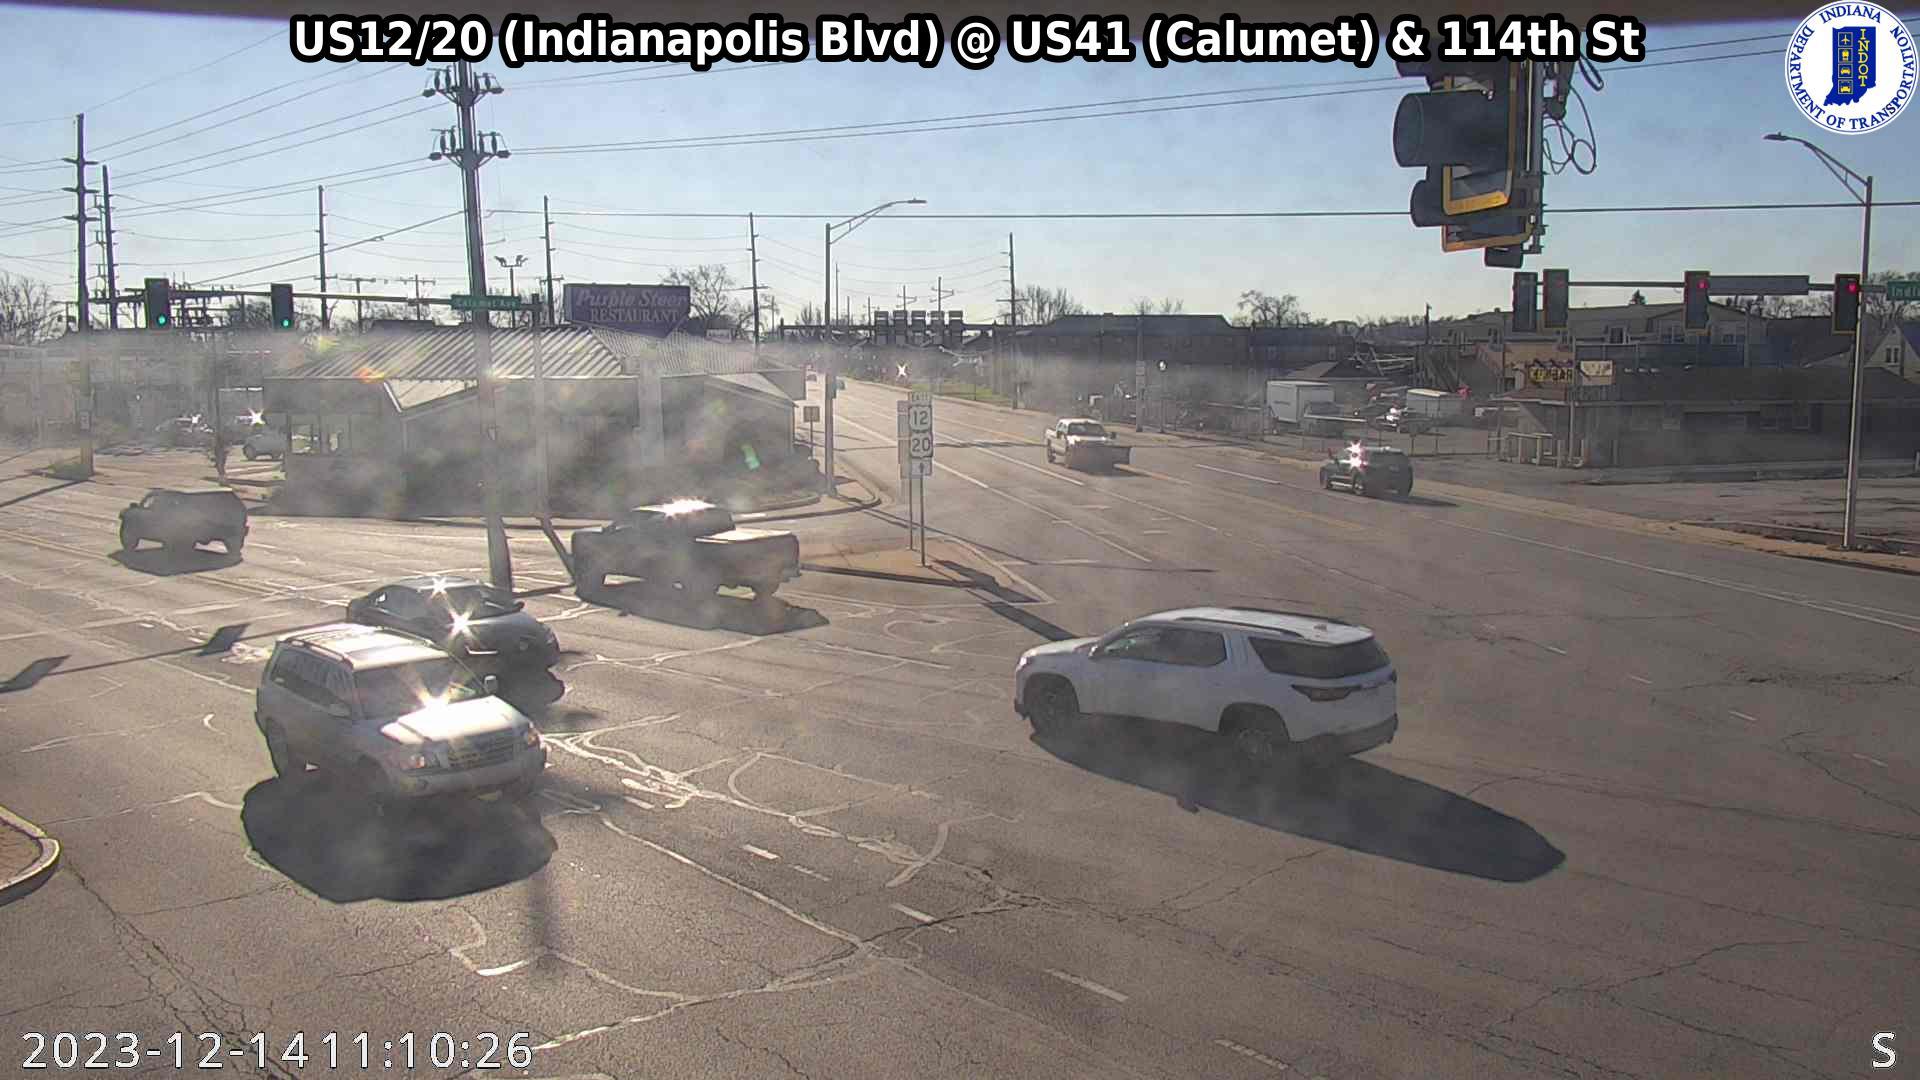 Traffic Cam Five Points: SIGNAL: US12/20 (Indianapolis Blvd) @ US41 (Calumet) & 114th St Player